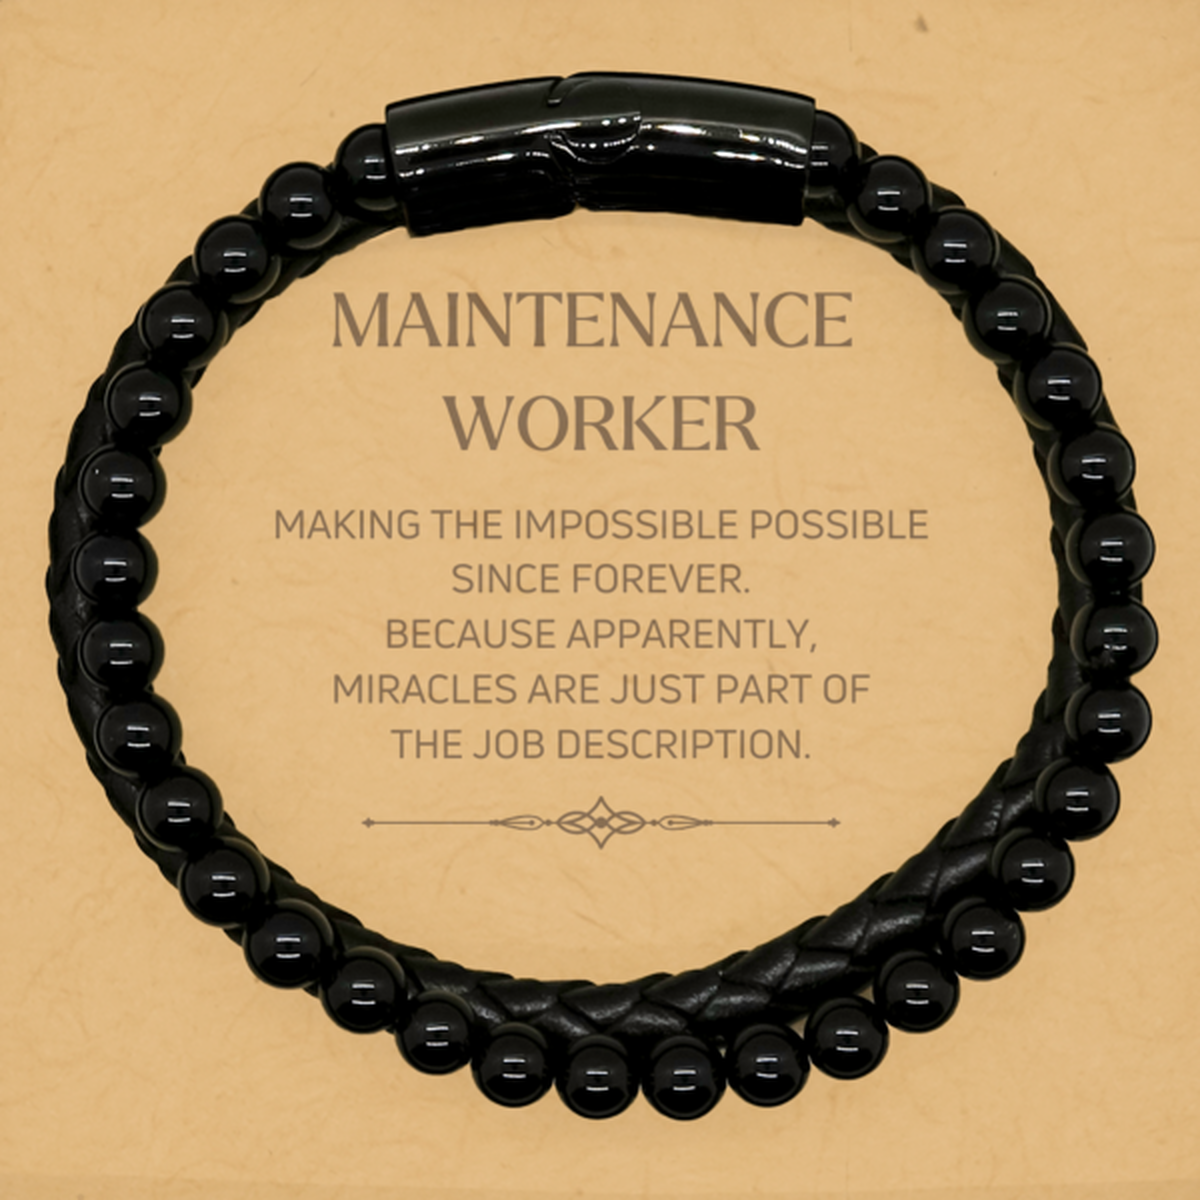 Funny Maintenance Worker Gifts, Miracles are just part of the job description, Inspirational Birthday Stone Leather Bracelets For Maintenance Worker, Men, Women, Coworkers, Friends, Boss